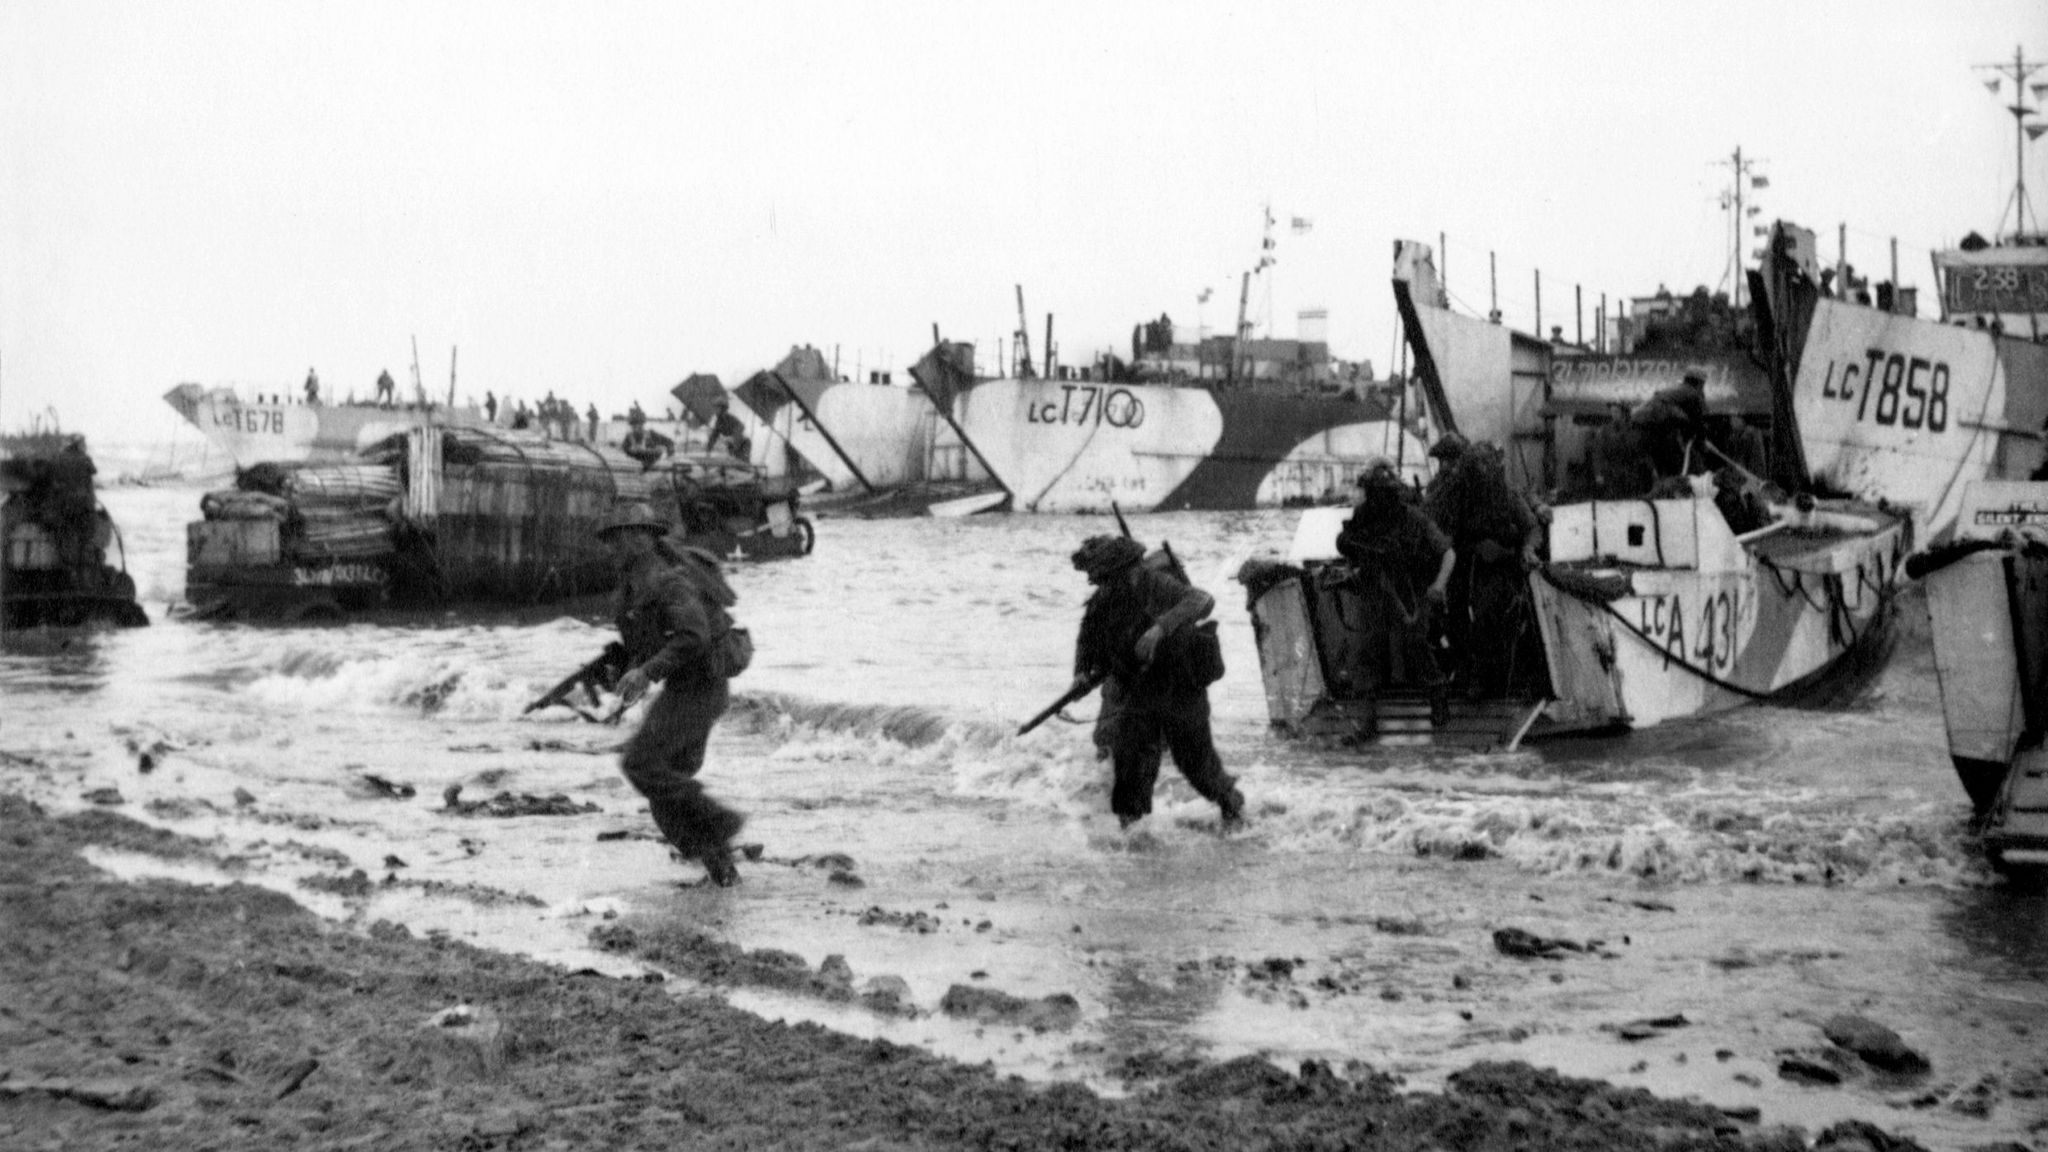 Black and white image showing troops emerge from landing craft on a Normandy beach during the invasion of France on 6 June, 1944 